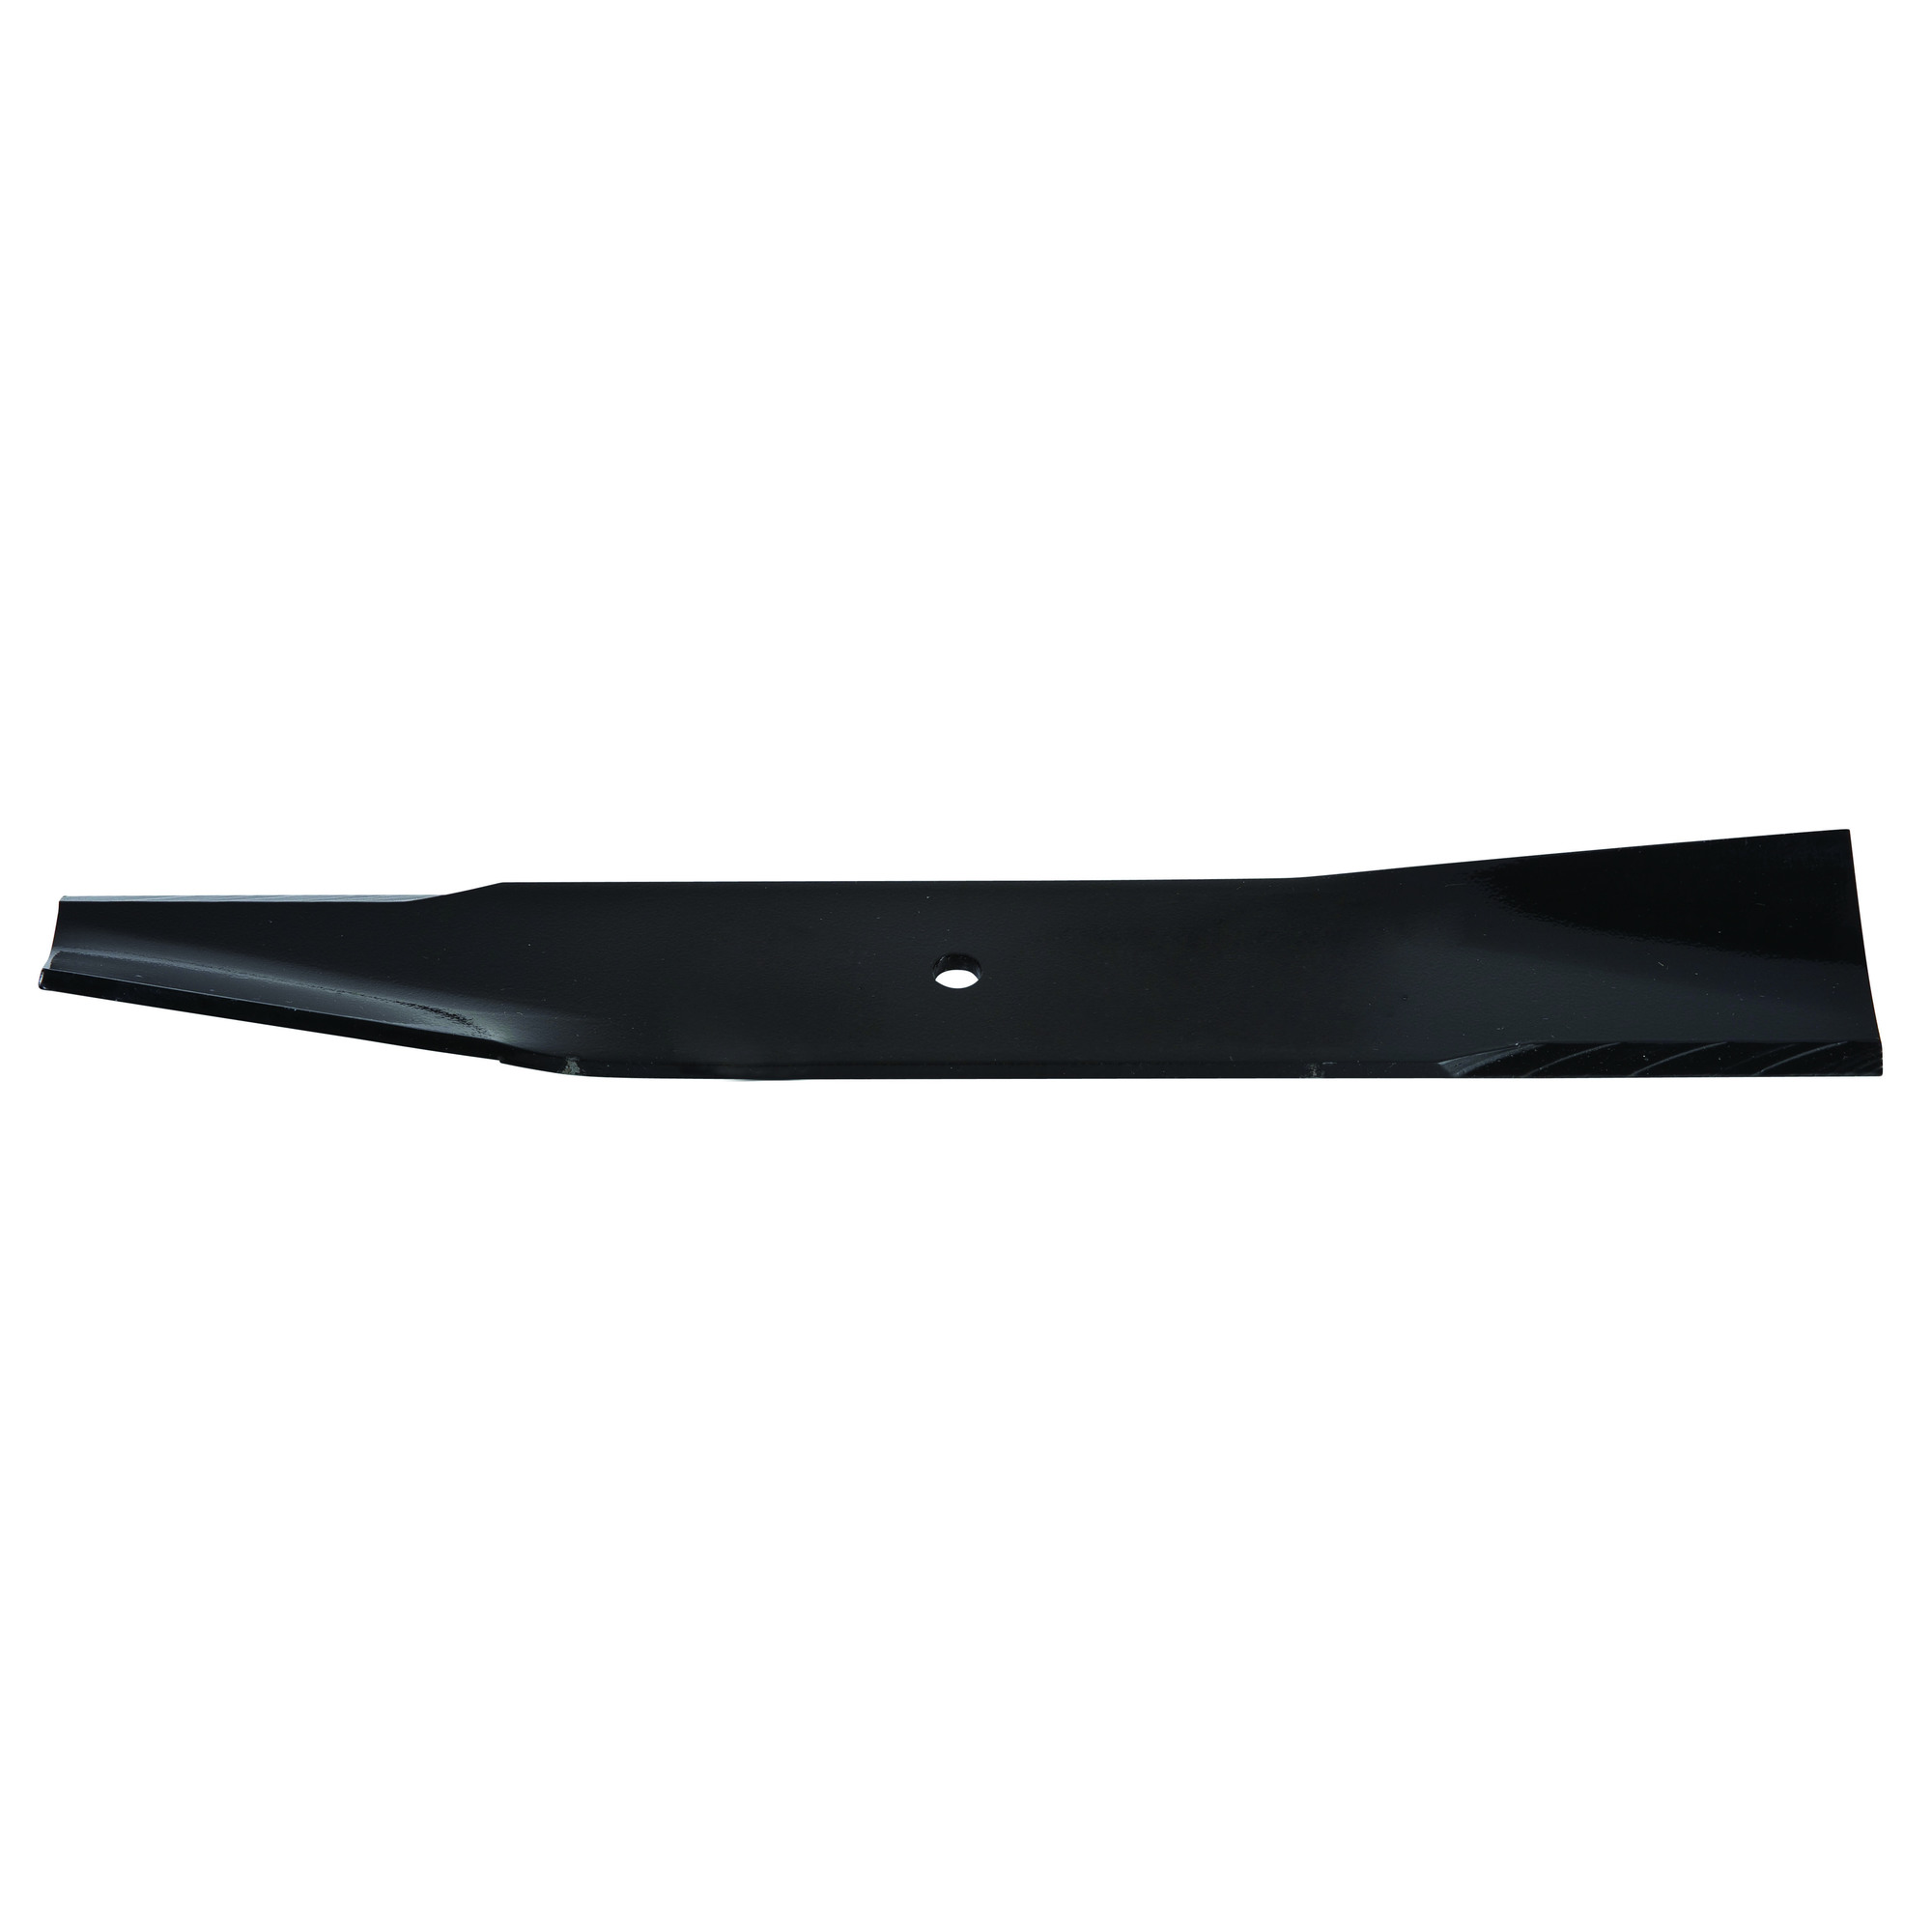 Oregon, Replacement Lawn Mower Blade, Length 15.375 in, Model 95-014